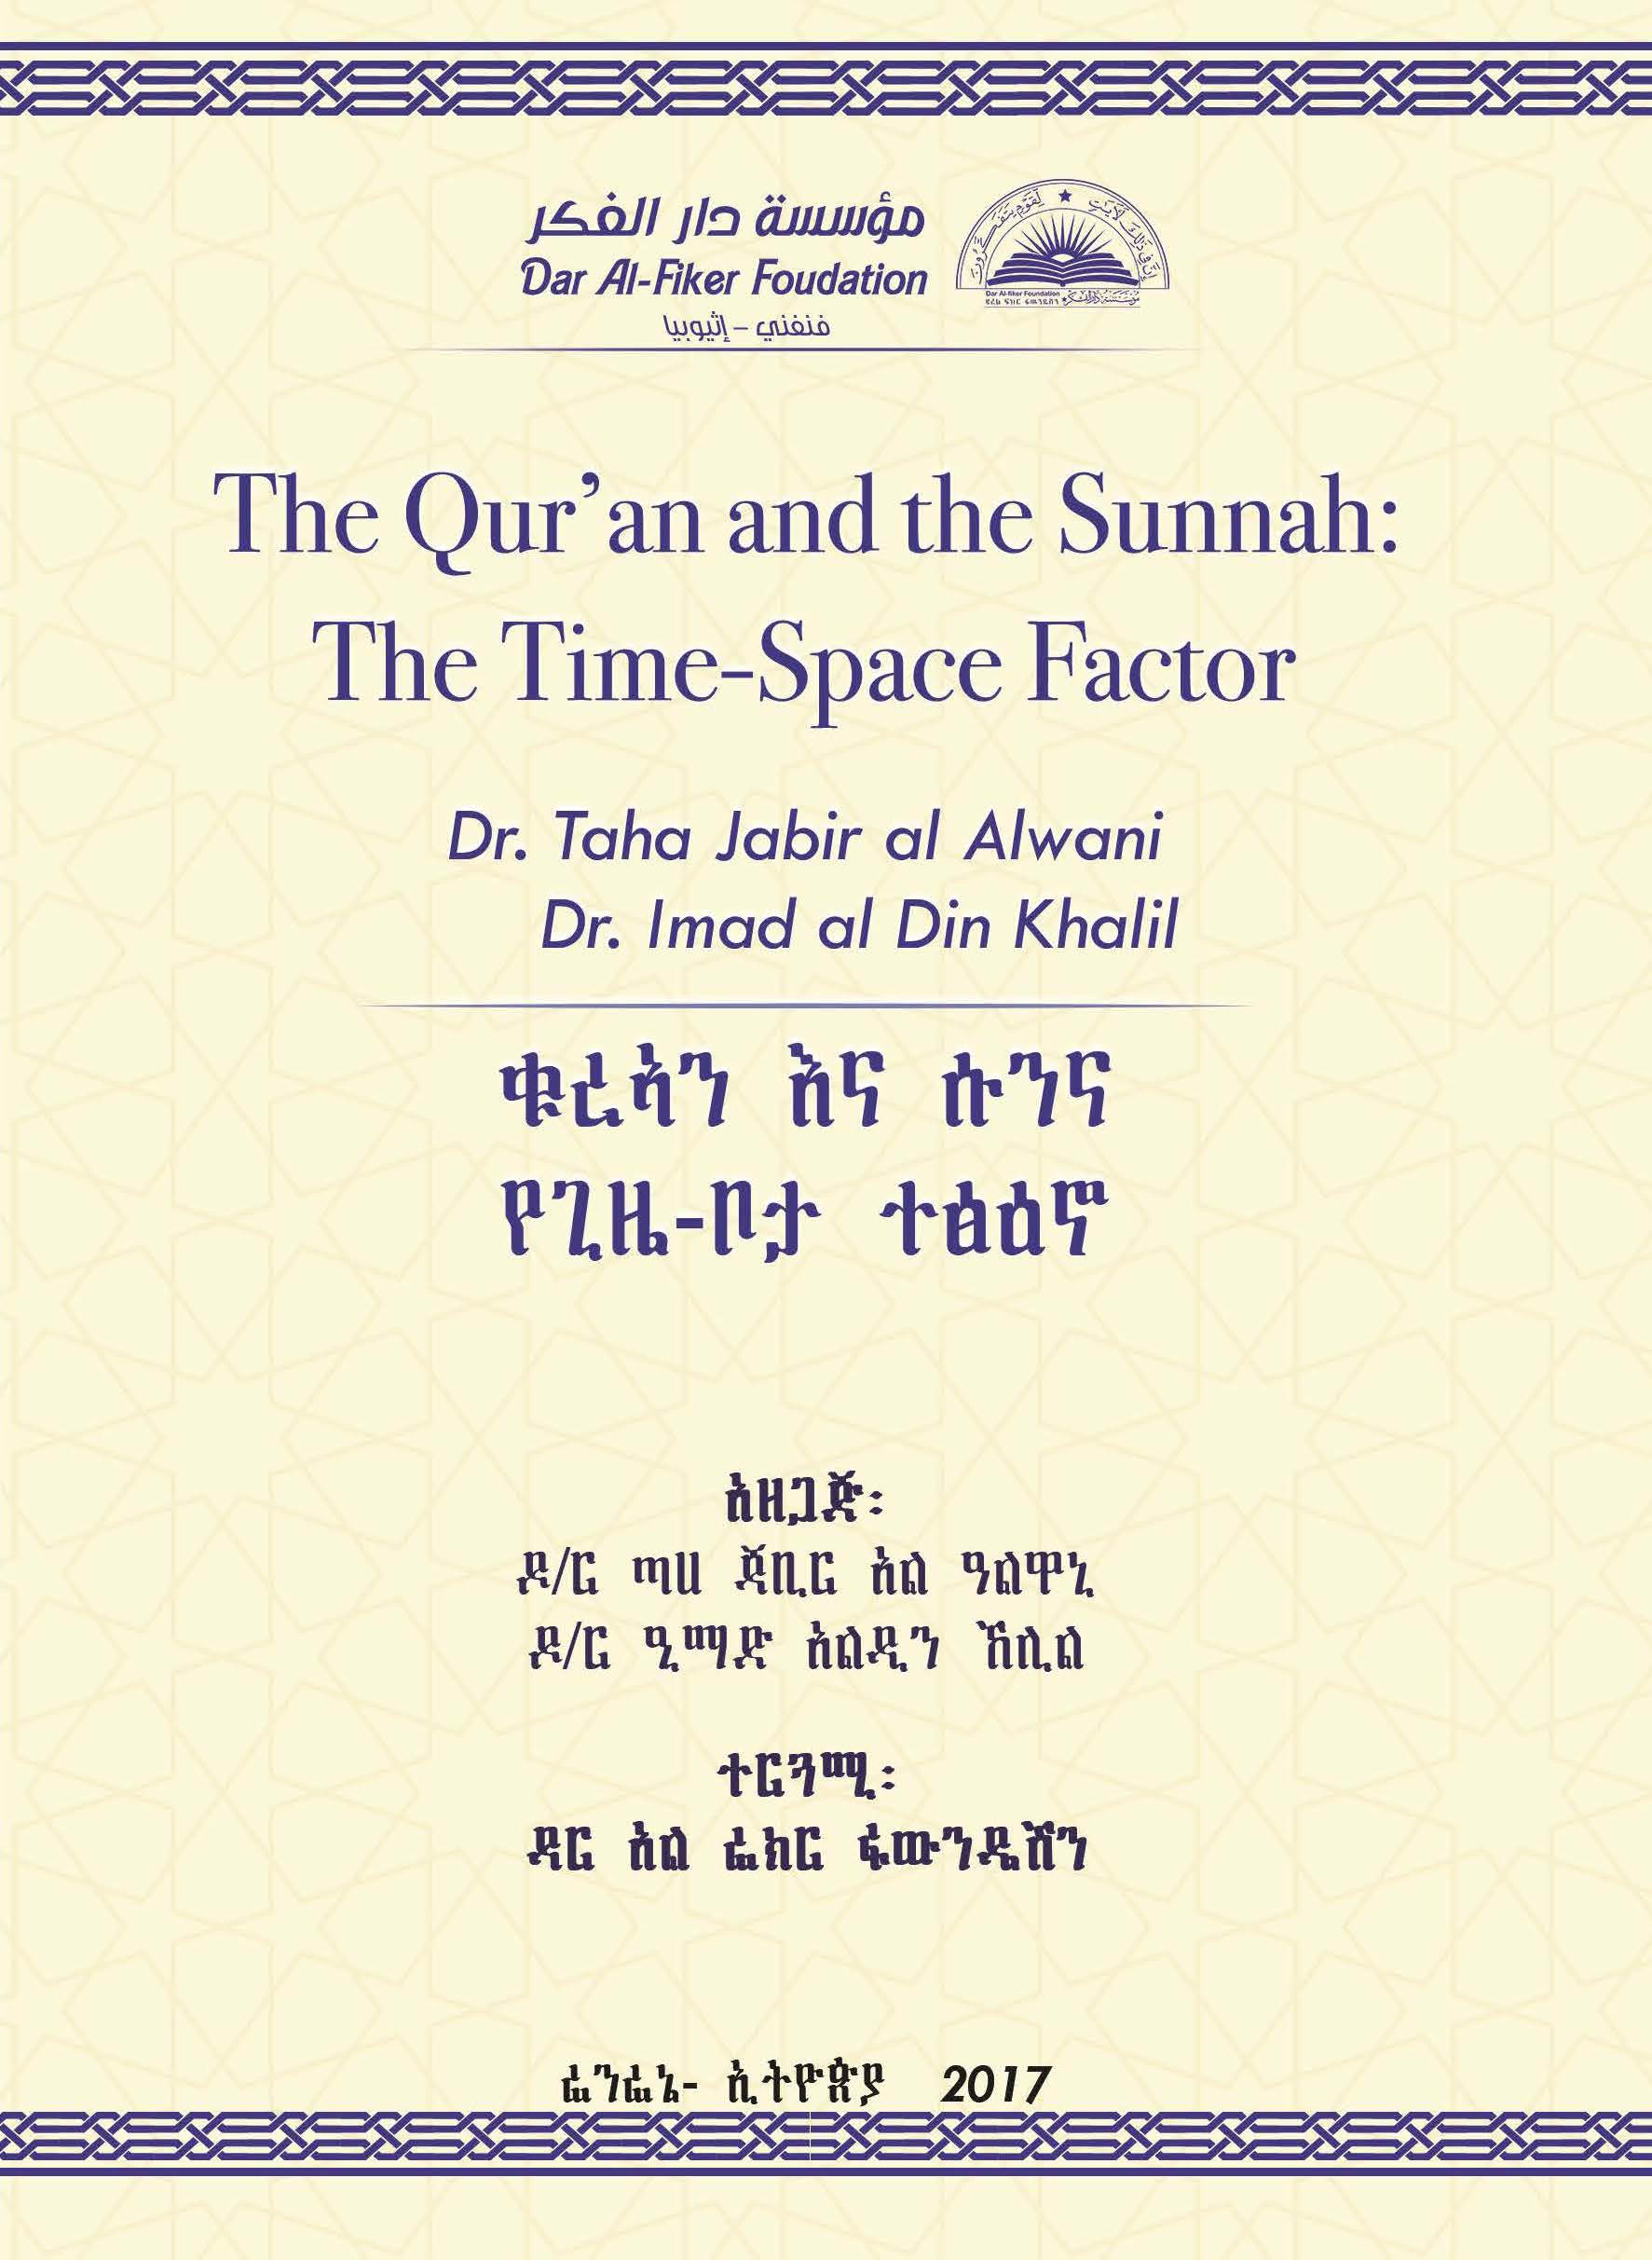 Amharic: ቁረኣን እና ሱንና የጊዜ-ቦታ ተፅዕኖ (The Qur’an and the Sunnah: The Time-Space Factor – Occasional Paper)